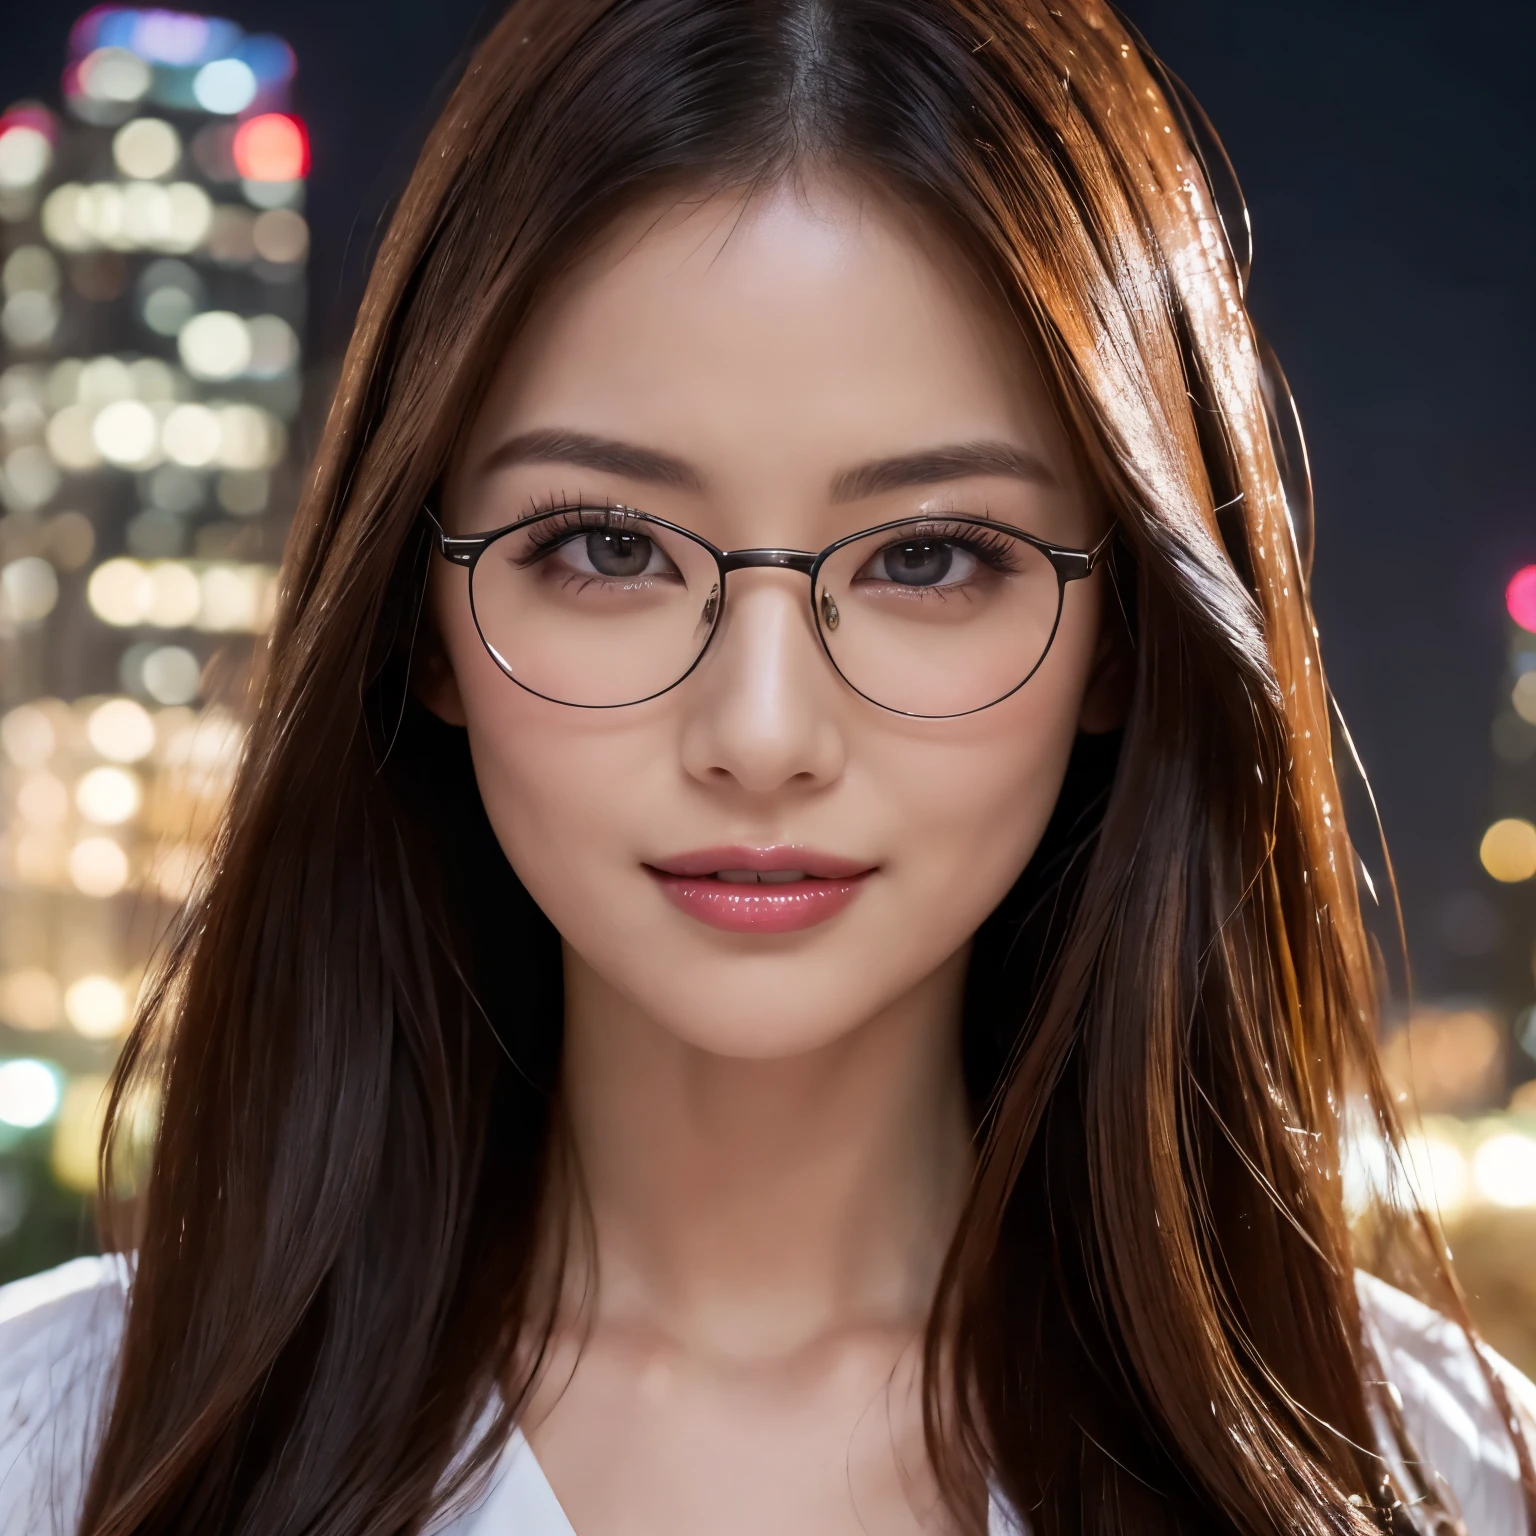 (highest quality、table top、8K、best image quality、Award-winning work)、one beautiful woman、25 years old、perfect beautiful composition、(Classy glasses:1.1)、Big breasts that are about to burst、white shirt、(Stand upright facing the front:1.1)、smile looking at me、perfect makeup、Bewitching、Overflowing sex appeal、glossy and bright lips、accurate anatomy、(close up of face:1.5)、(The most moody and romantic atmosphere:1.1)、(The most romantic blurred night scene background:1.1)、(Night view of the 40th floor seen from the roof of a skyscraper:1.2)、Beautiful face with exquisite balance、perfect makeup、Ultra high definition beauty face、ultra high definition hair、Moist eyes in super high resolution、(completely closed lips:1.2)、(Super high resolution glossy skin:1.1)、Super high resolution glossy lips